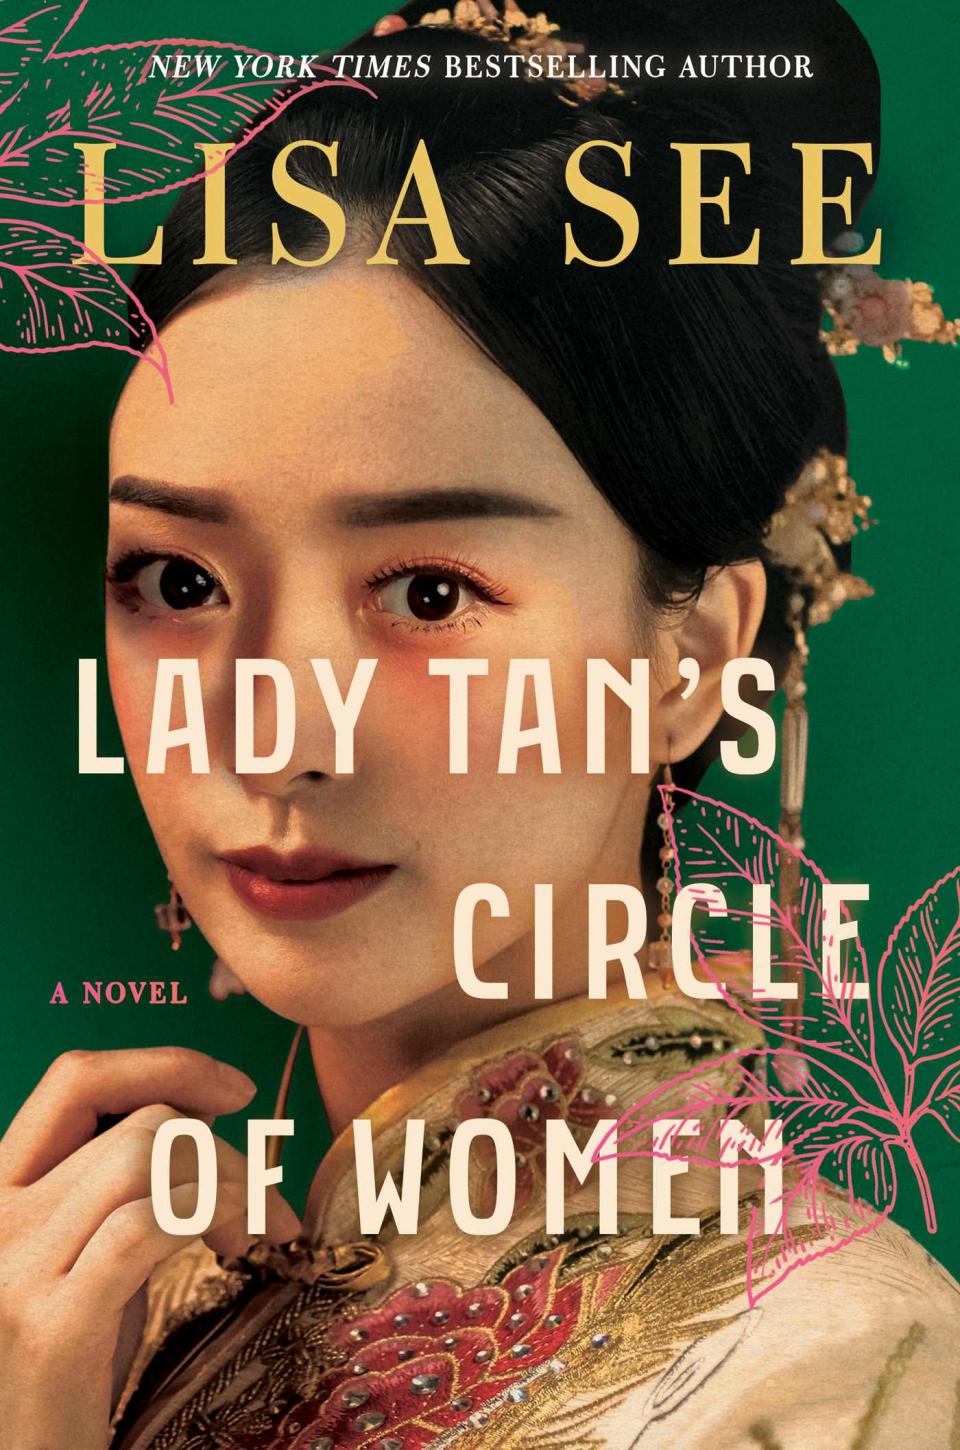 “Lady Tan's Circle of Women" is inspired by Tan Yunxian, a real-life physician from the 15th century.